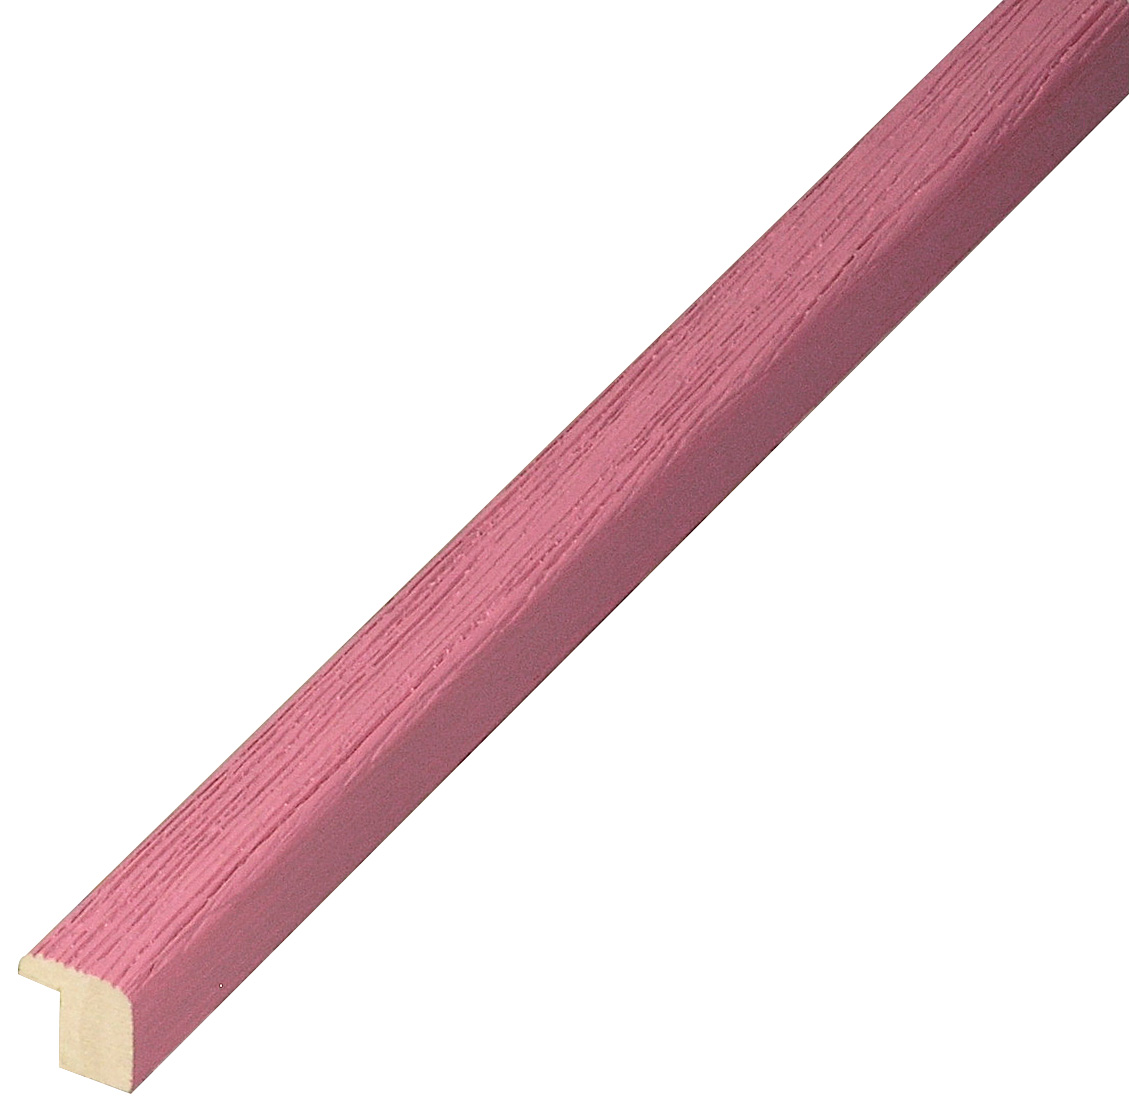 Moulding ayous woodworm treated mm 13x13 - scratched finish - fuchsia - 311FUCSIA